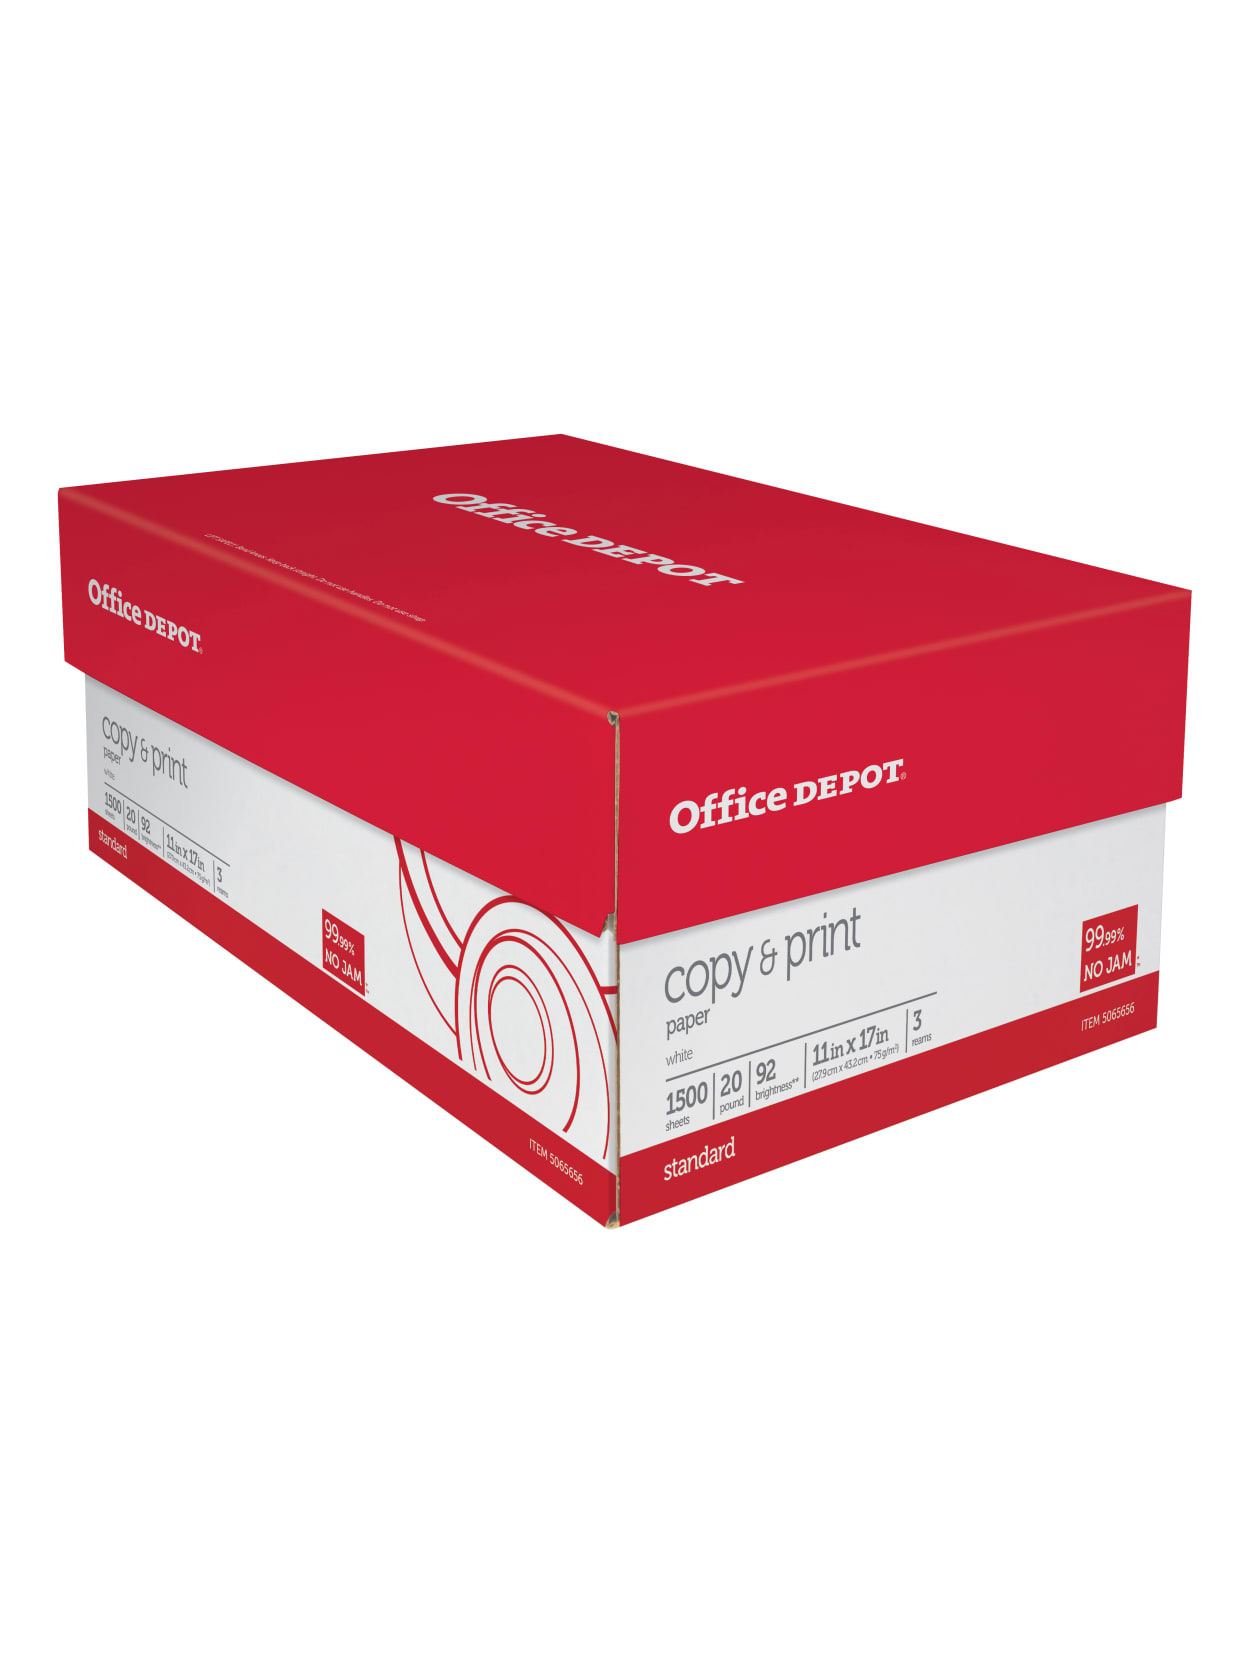 Office Depot Brand Copy And Print Paper Ledger Size 11 X 17 92 Us104 Euro Brightness 20 Lb Ream Of 500 Sheets Case Of 3 Reams Office Depot